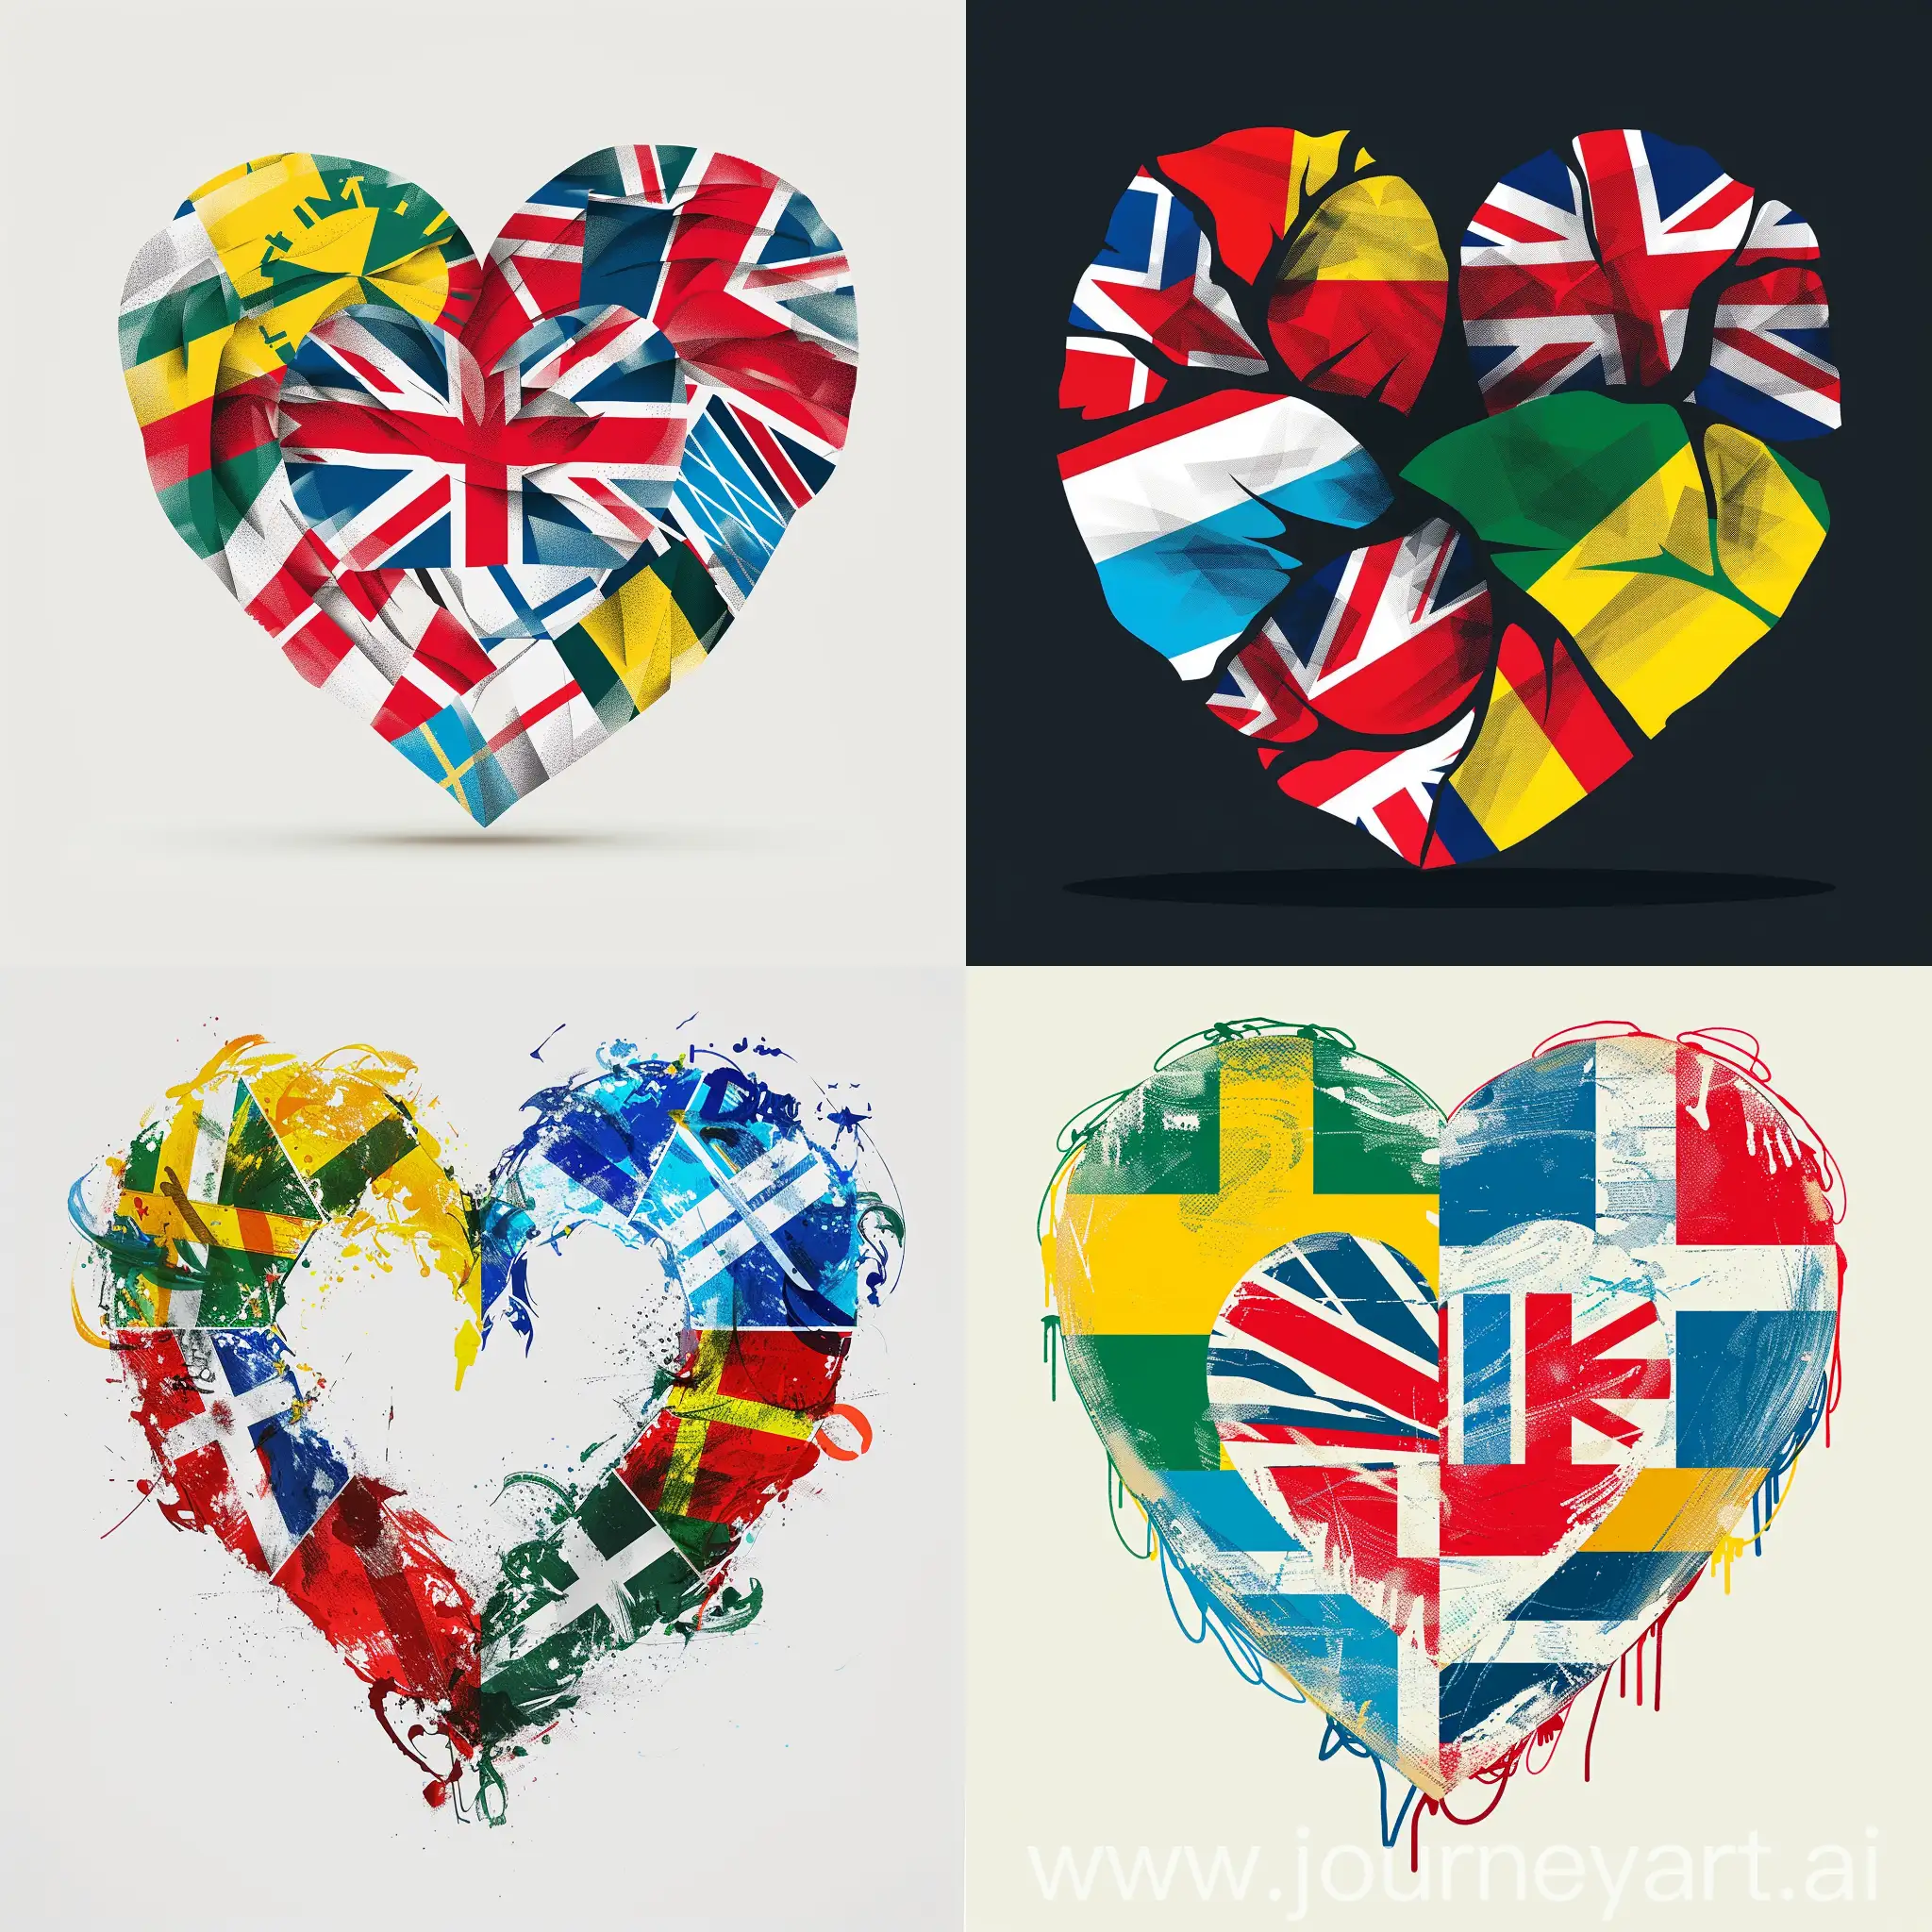 Nordic-Flags-Heart-Unity-Collaboration-Art